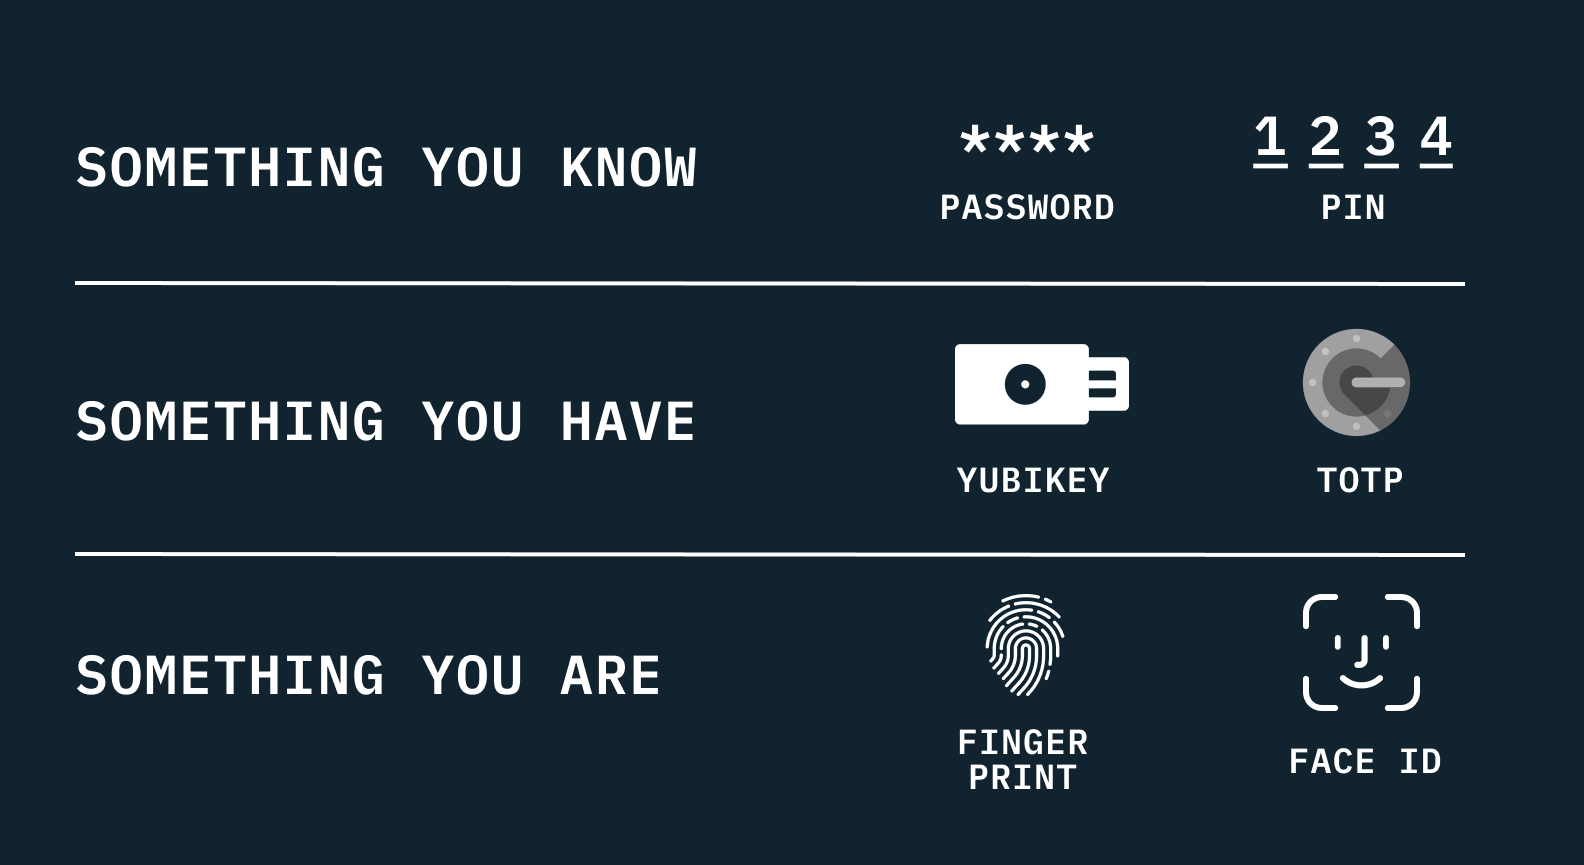 A table in white font on a dark blue background, listing three kinds of authentication: Something you know – passwords and pins; Something you have - yubikey and authenticator app; Something you are – thumbprint and face